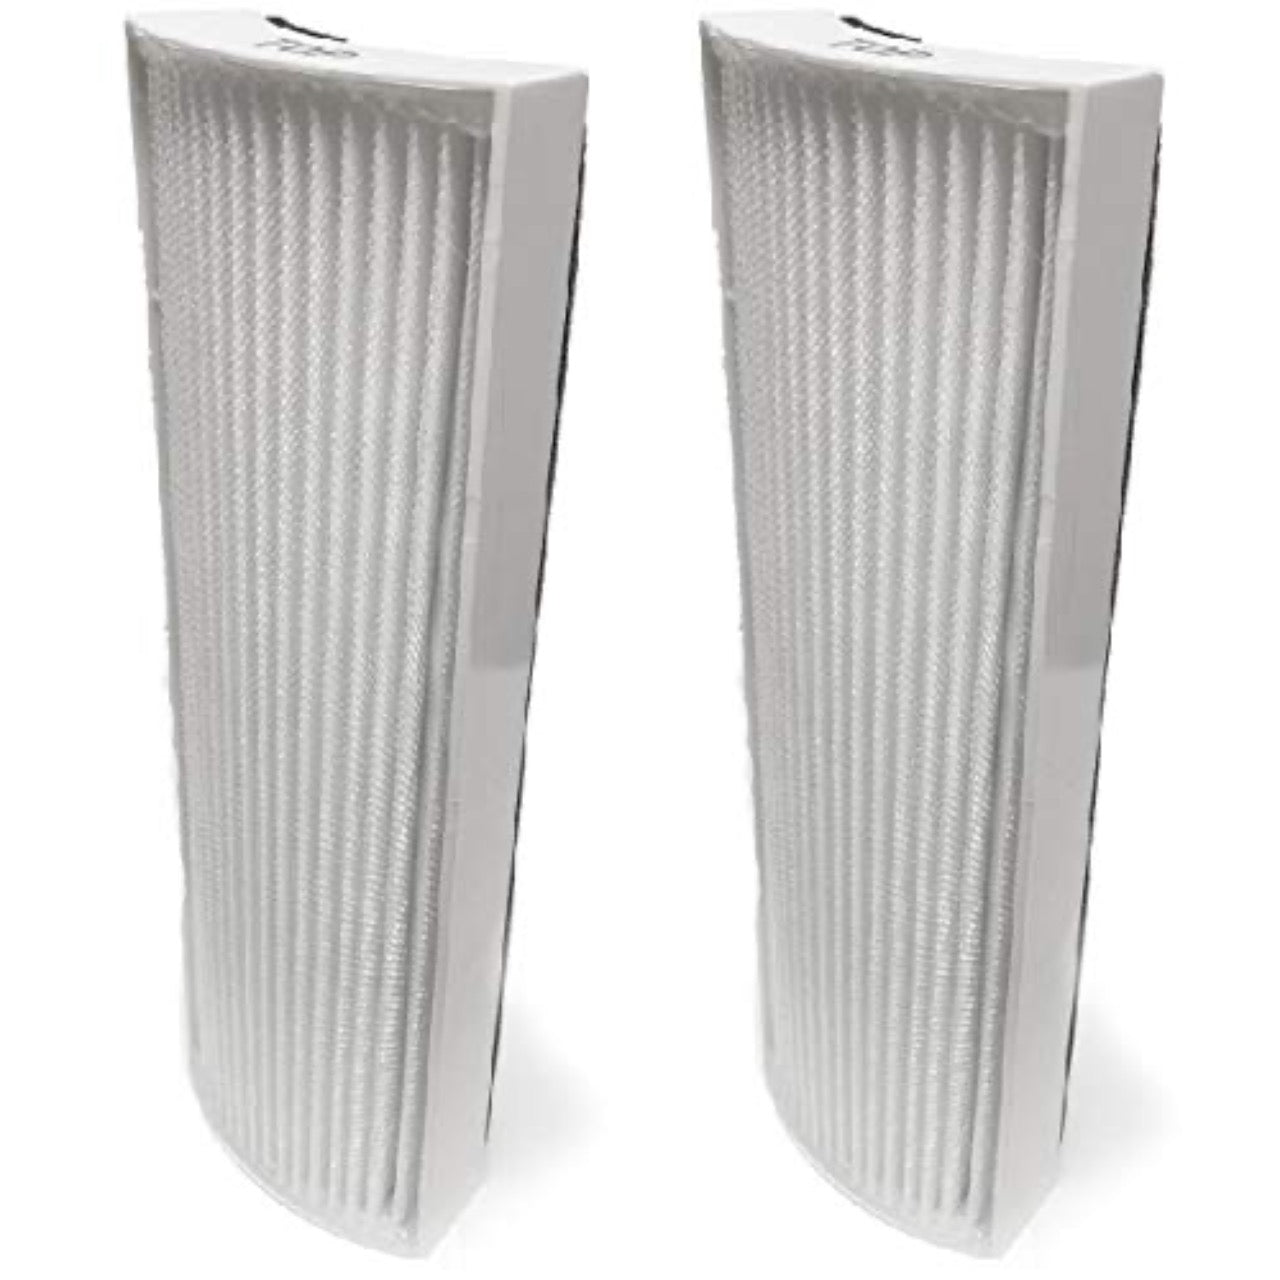 Nispira True HEPA Air Filter Compatible with Envion Therapure Air Purifier TPP220, TPP220H, TPP220M Part TPP220F